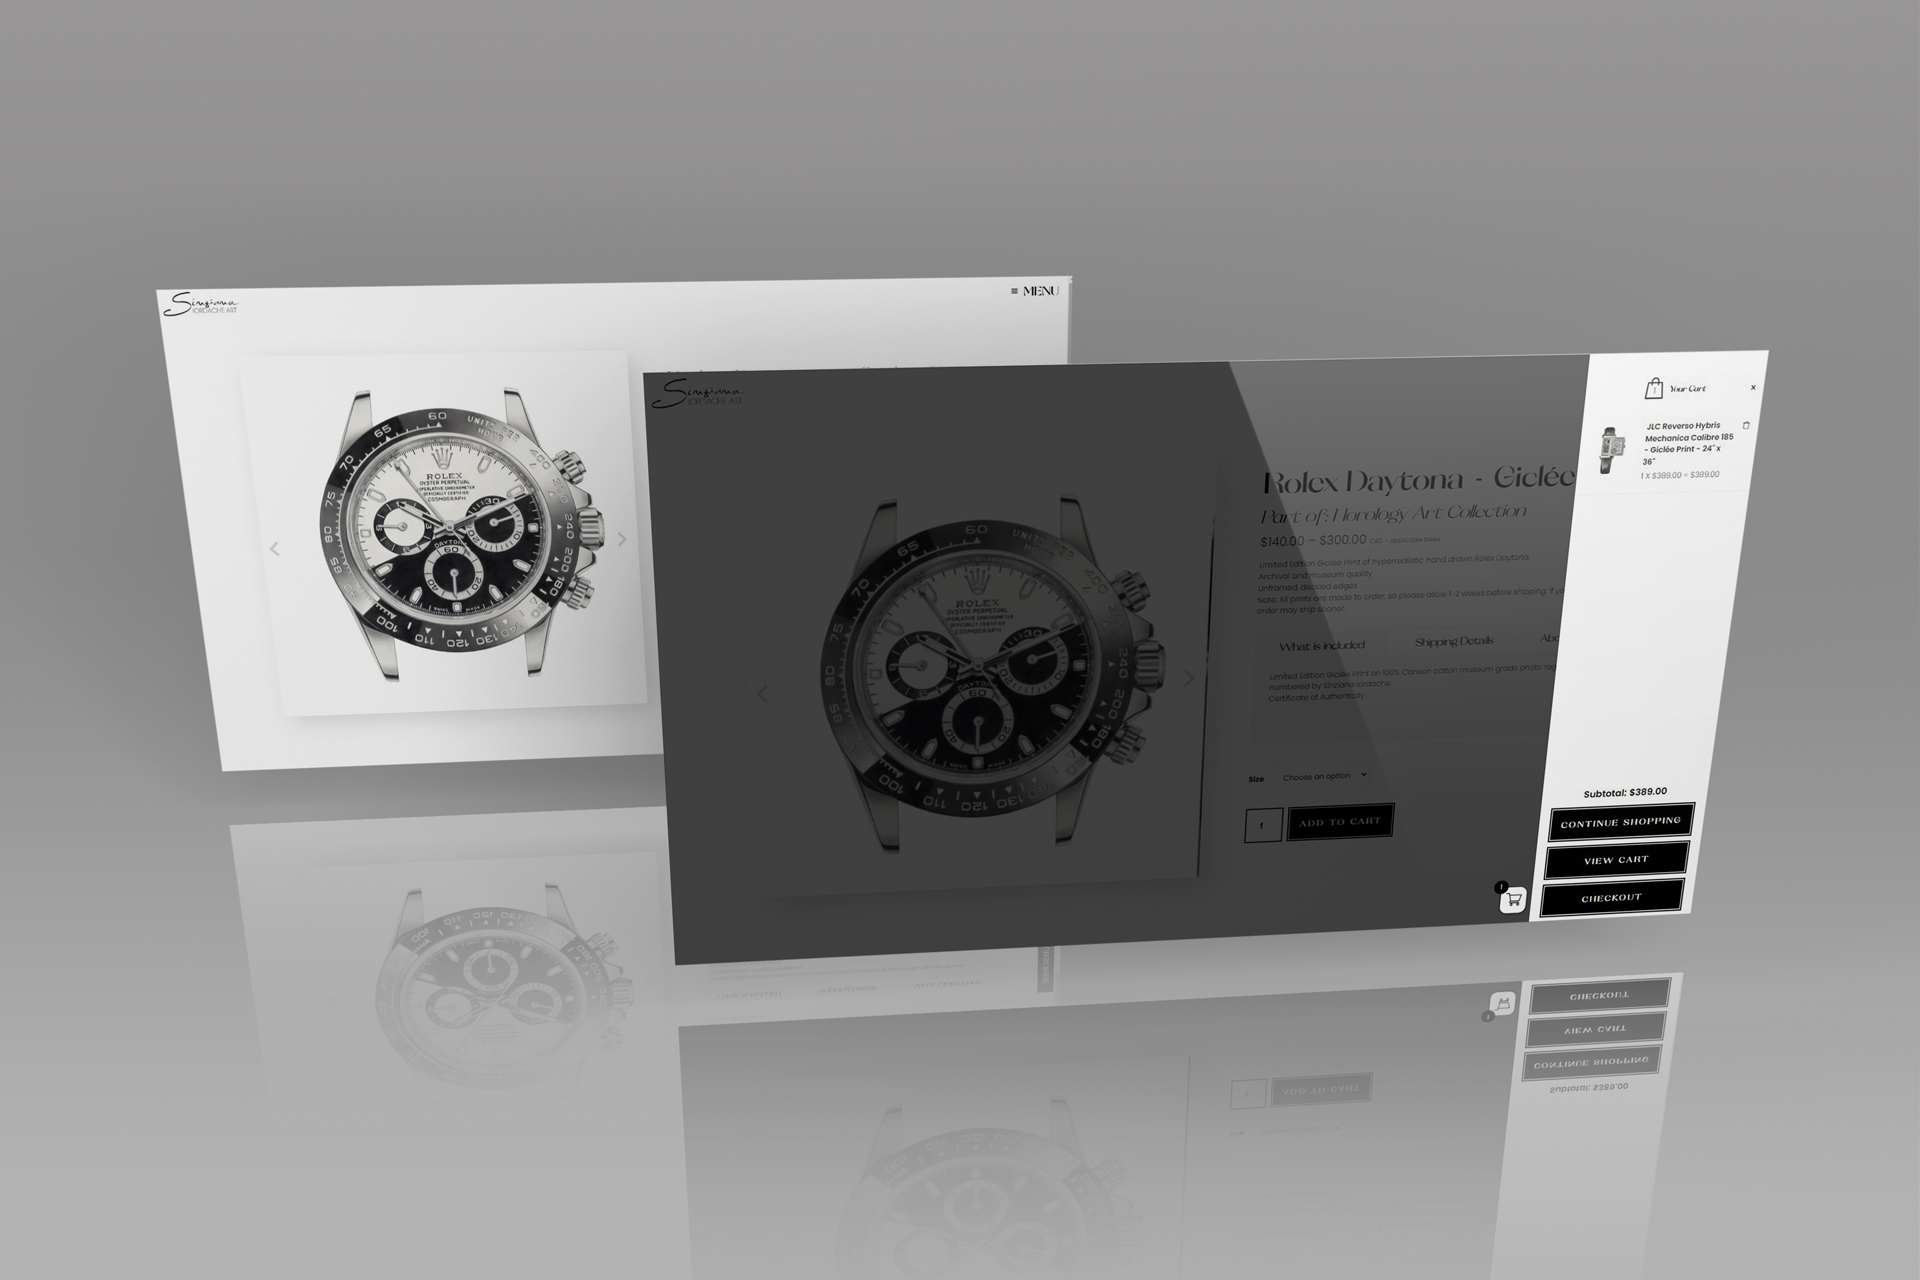 In this image by PixelUp, we are presented with a snapshot of the Sinziana Iordache Art's custom website design, focusing specifically on the 'Rolex Daytona - Giclee Print' product page. The scene features two isometric desktop screens set against a dark gradient background, providing a clear view of the unique design elements incorporated into the page. The first screen prominently displays the main product details while also showcasing the side cart section design, offering viewers insight into the seamless user experience and aesthetic appeal of the website.